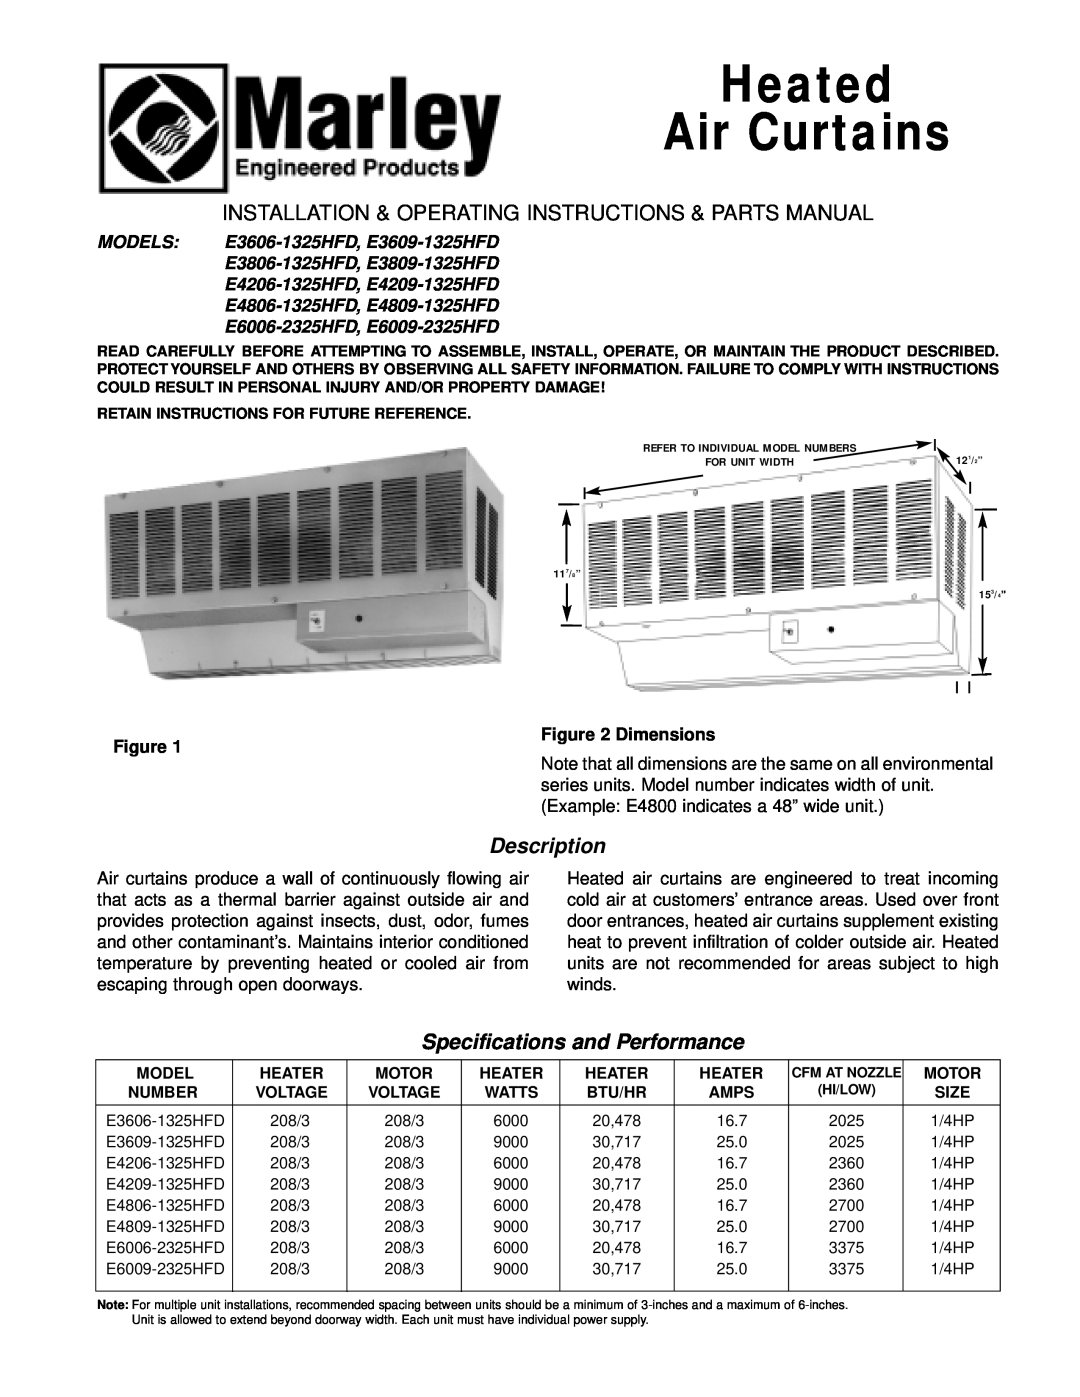 Marley Engineered Products E6006-2325HFD specifications Description, Specifications and Performance, Heated Air Curtains 